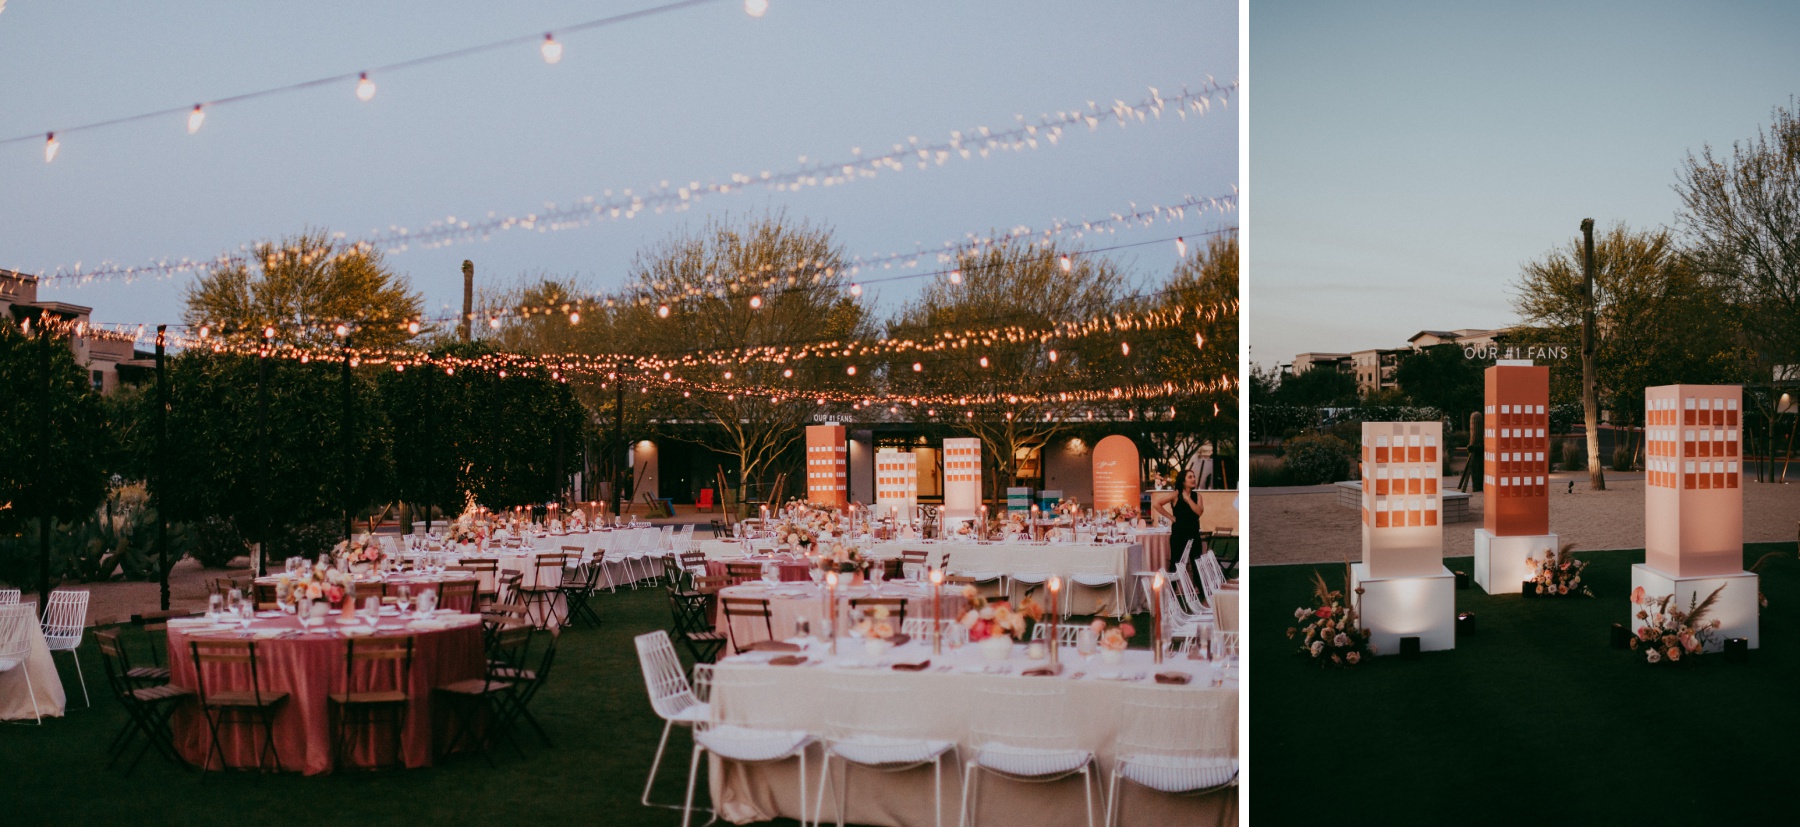 Our Top 10 Favorite Outdoor Wedding Venues in Arizona - The Details Duo